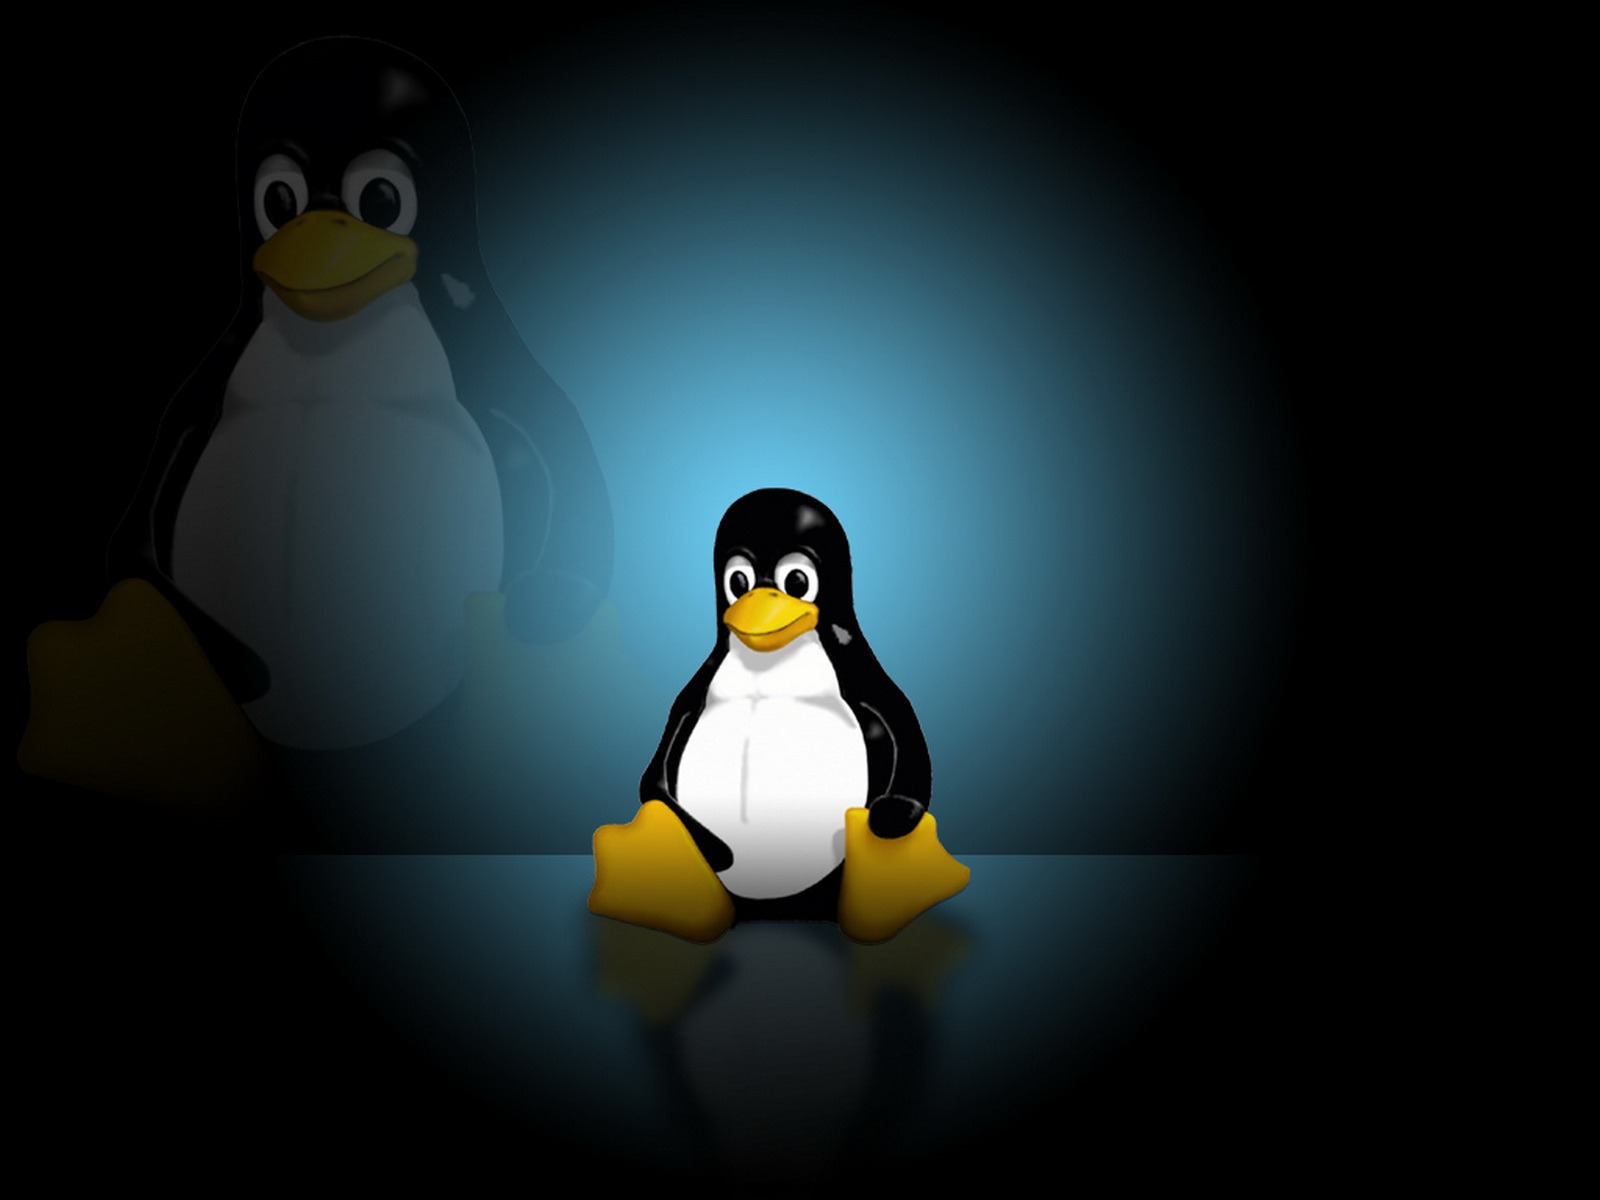 Linux tapety (2) #6 - 1600x1200